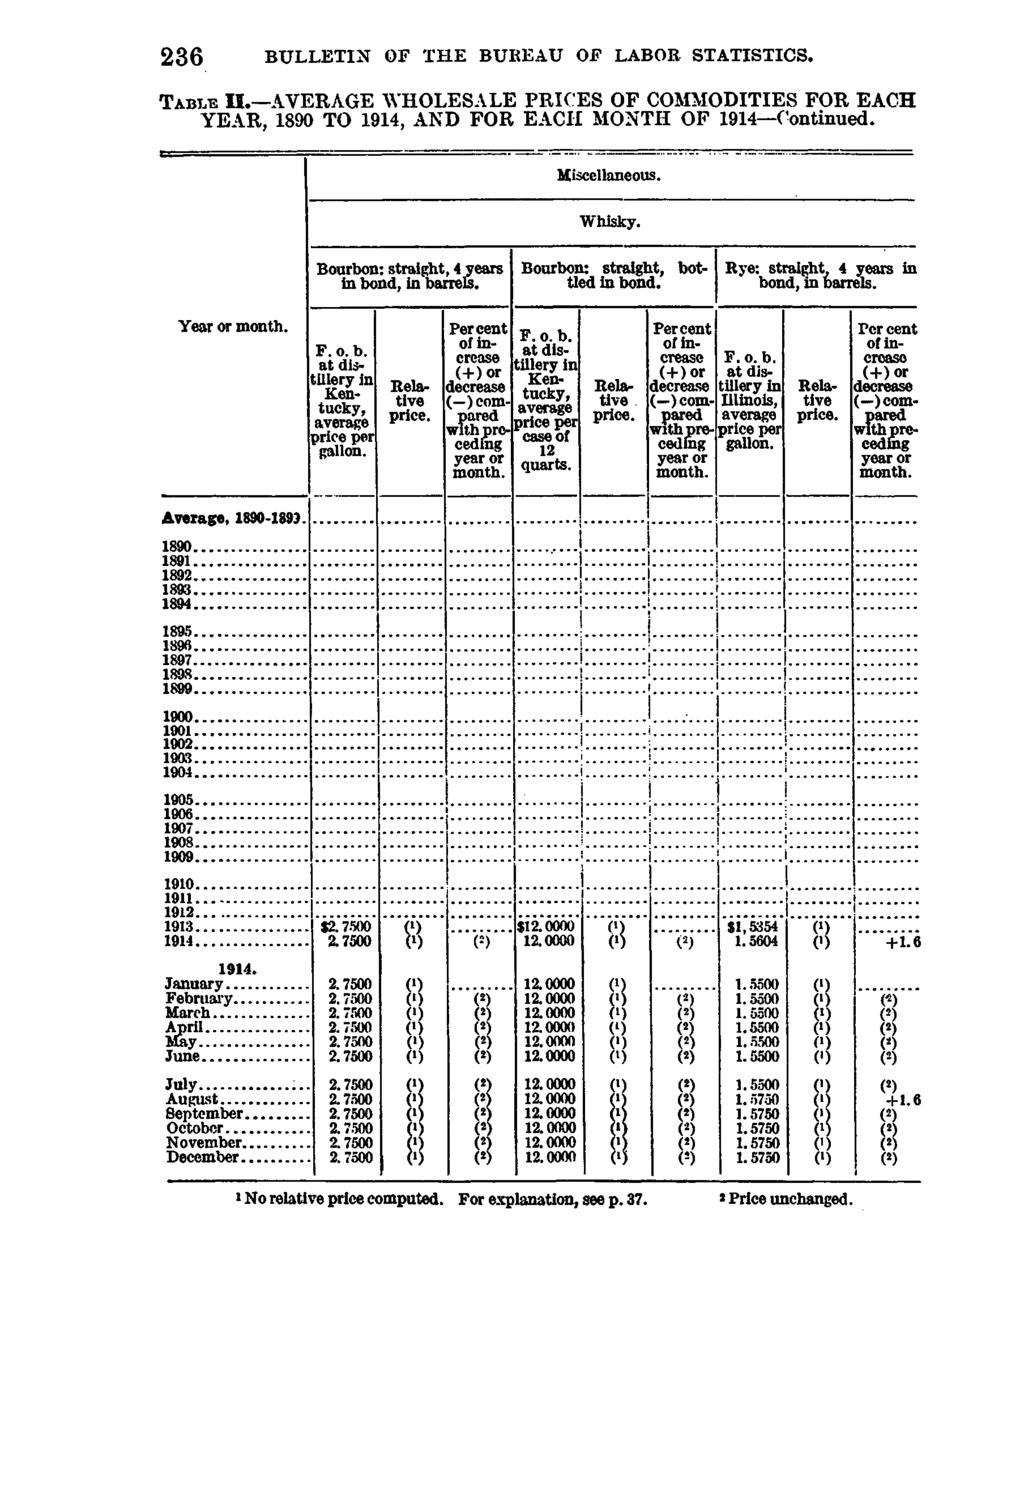 236 BULLETIN OF THE BUREAU OF LABOR STATISTICS. T a b lf. II. AVERAGE WHOLESALE PRICES OF COMMODITIES FOR EACH YEAR, 1890 TO 1914, AND FOR EACH MONTH OF 1914 Continued. Miscellaneous. Whisky.